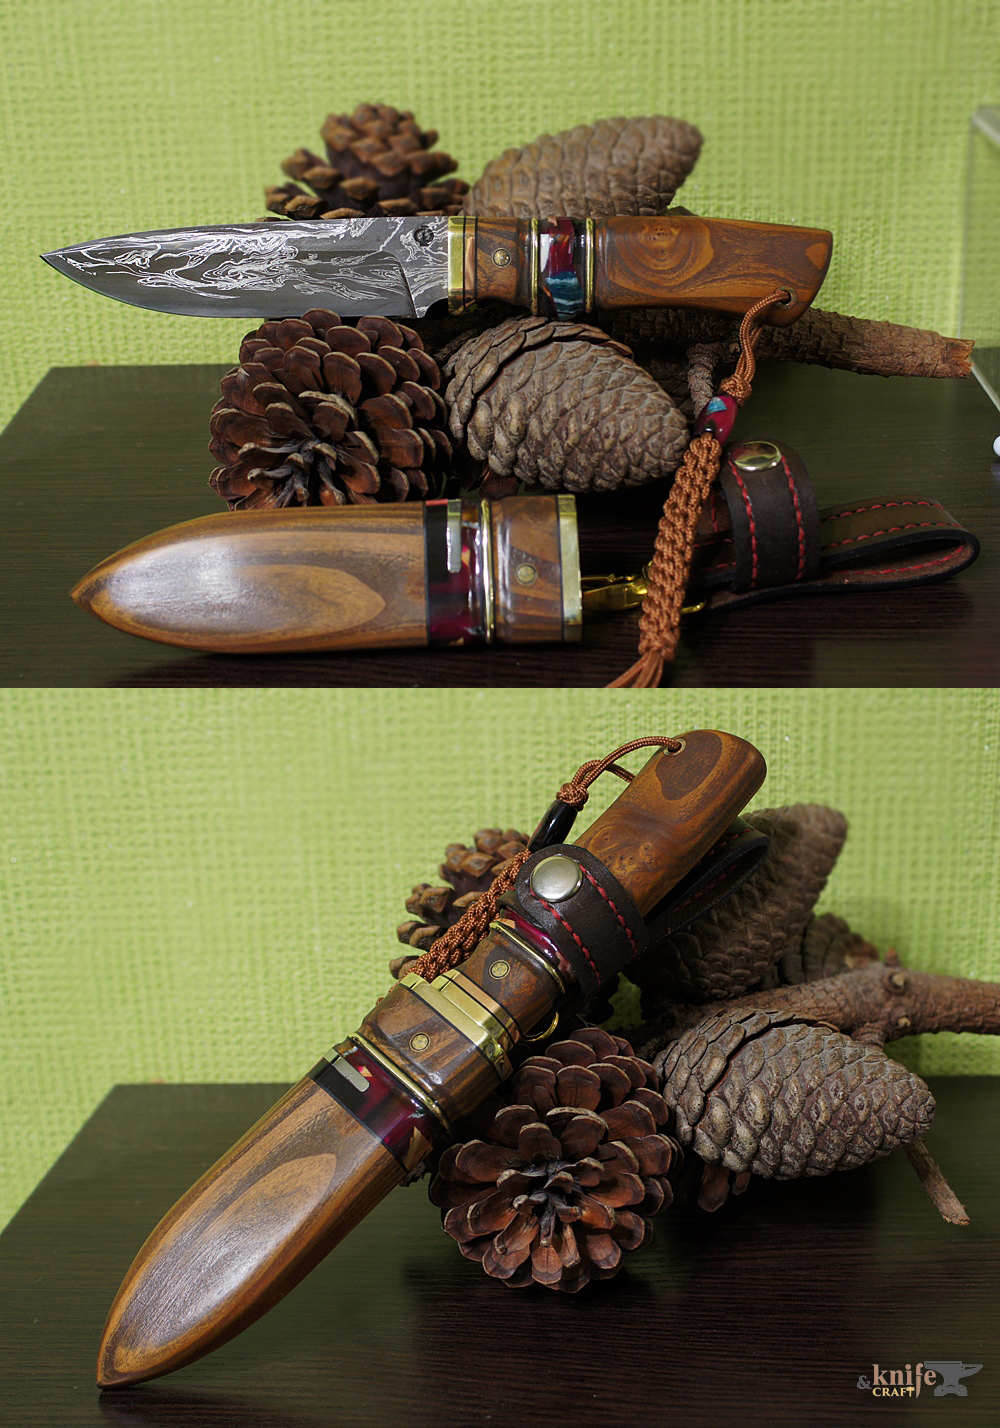 Russian handemade middl fishing knife with laminated Damascus blade